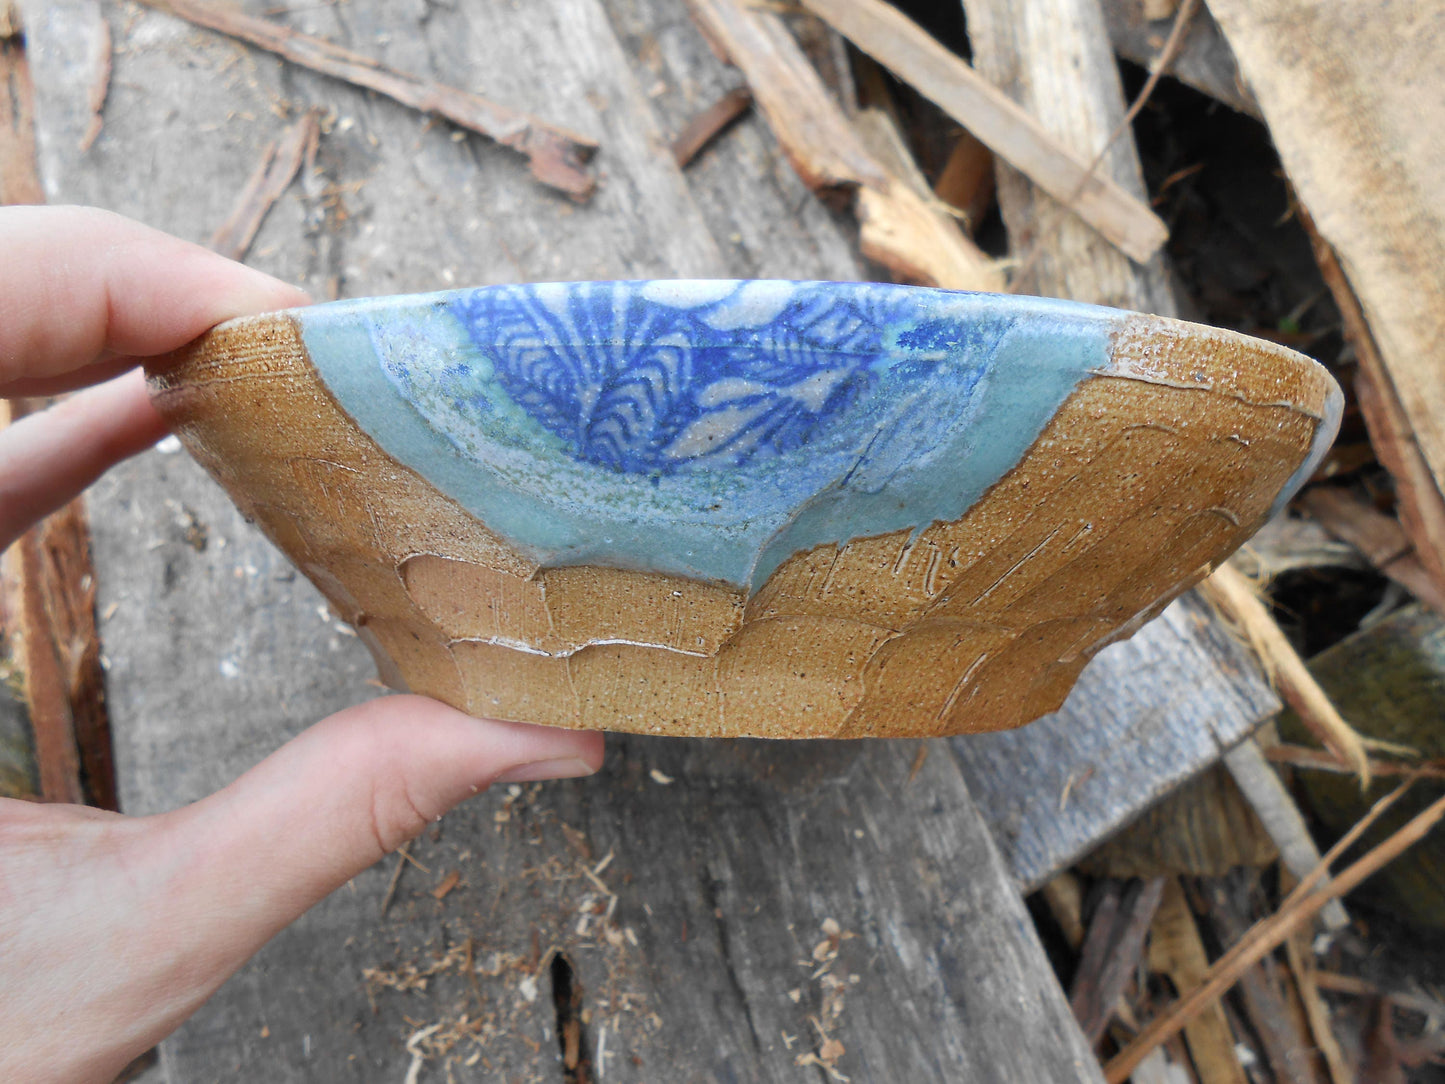 Spotted Flower Wood Fired Ceramic Bowl